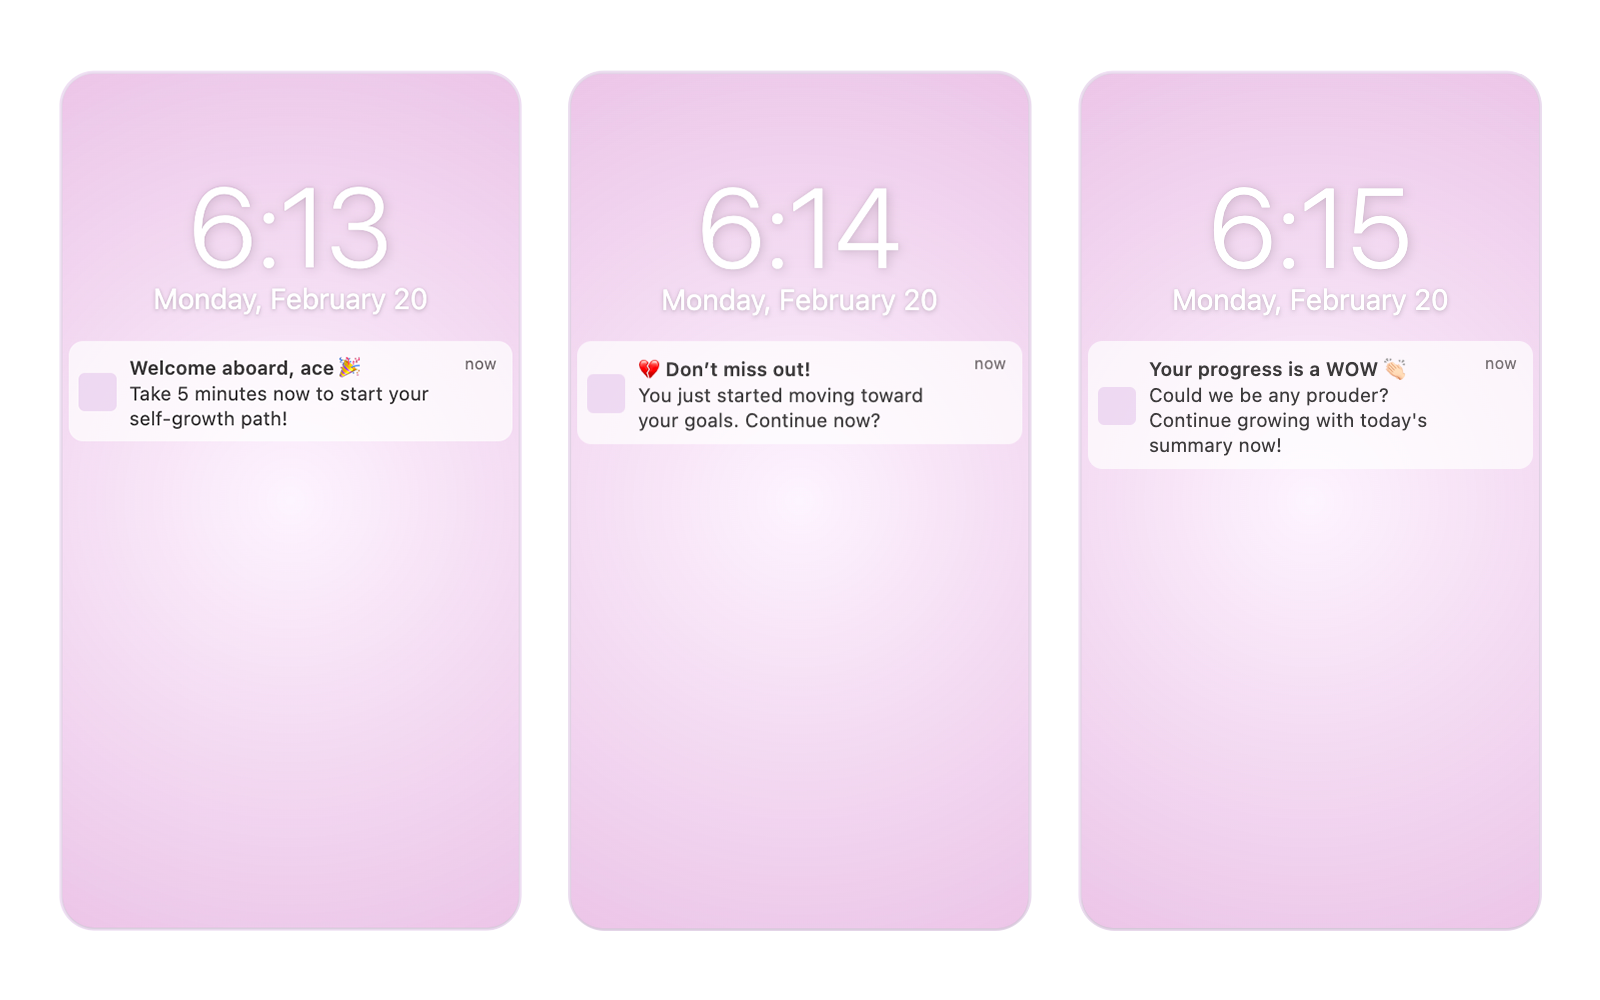 Three phone lock screens, with baby pink backgrounds, show three different push notifications from Headway.